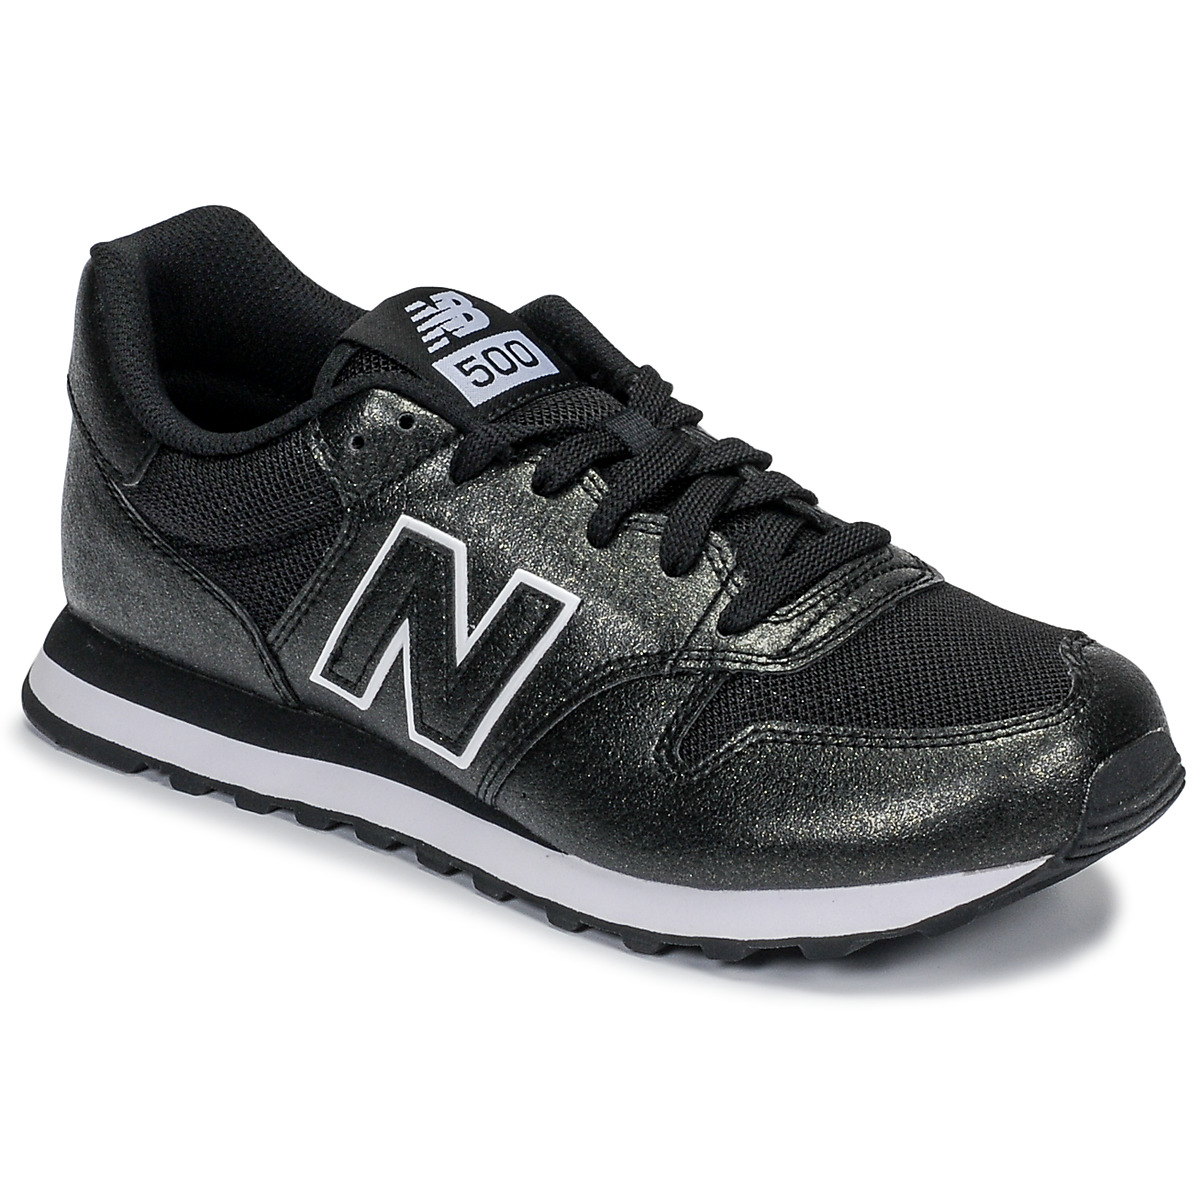 magasin chaussure new balance grenoble